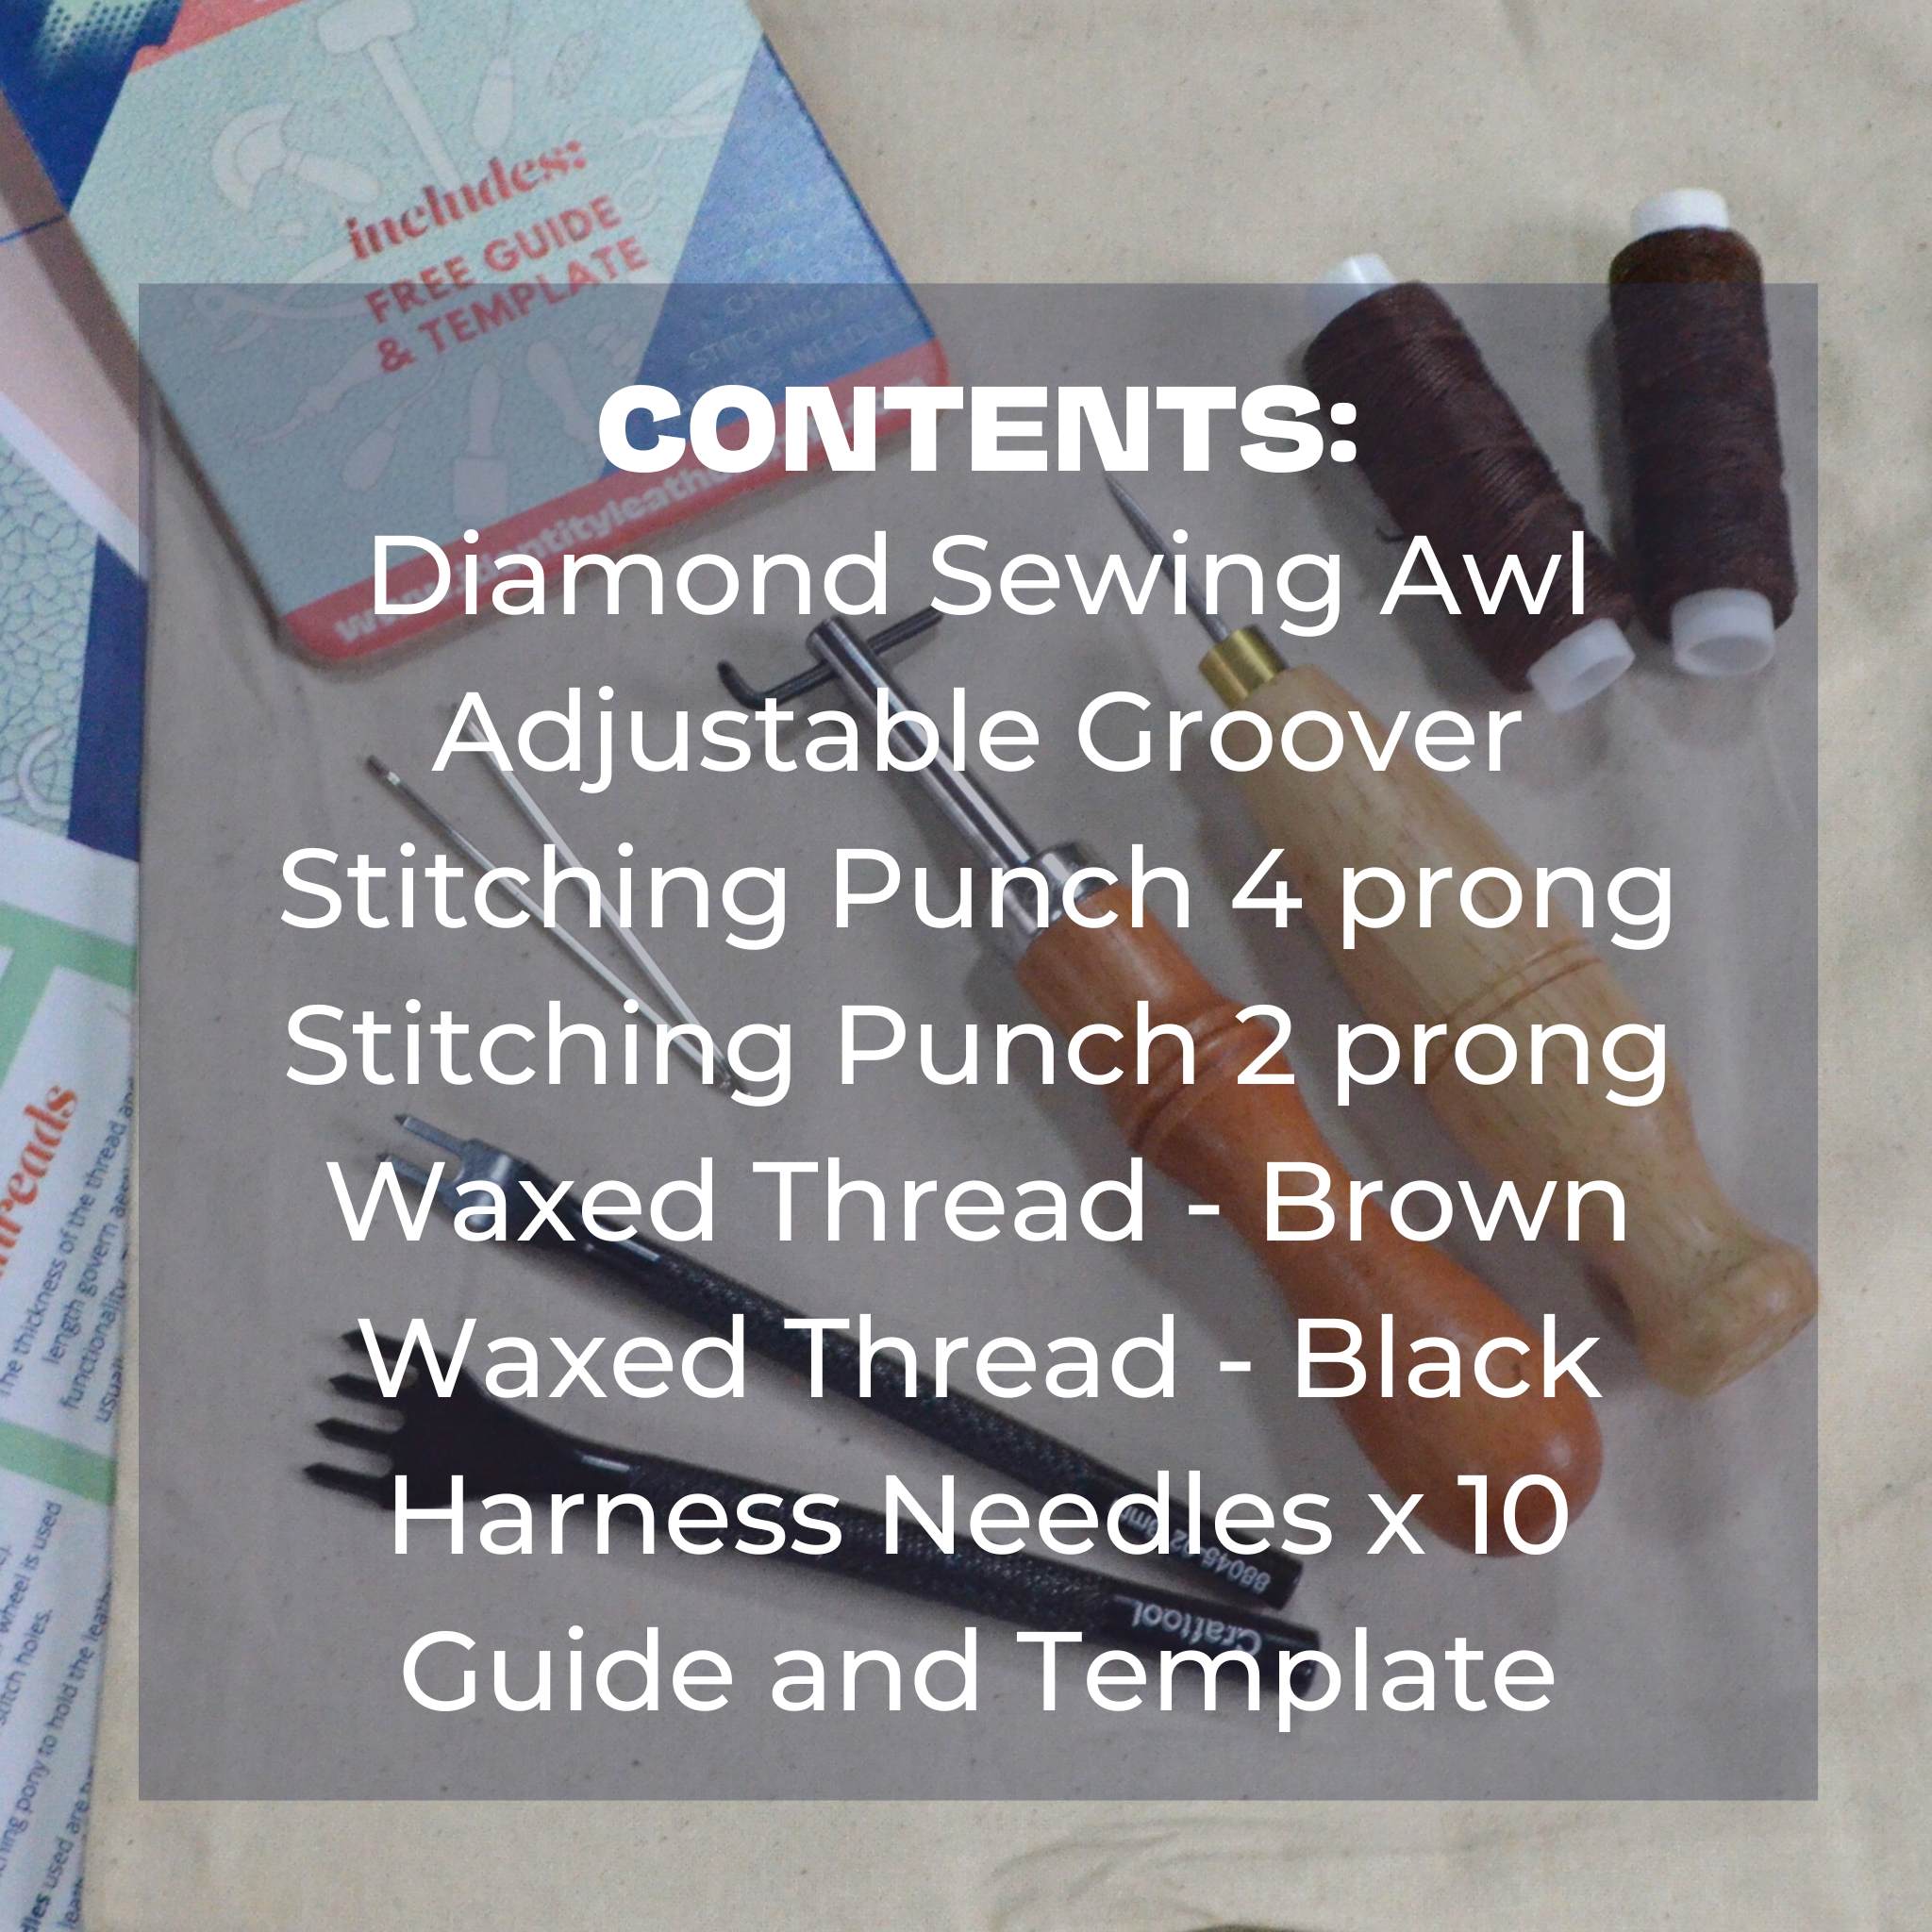 This comprehensive pack will give you a great start for hand sewing leather and is ideal for many projects such as card cases,pouches, bags plus it is also ideal for repairs.